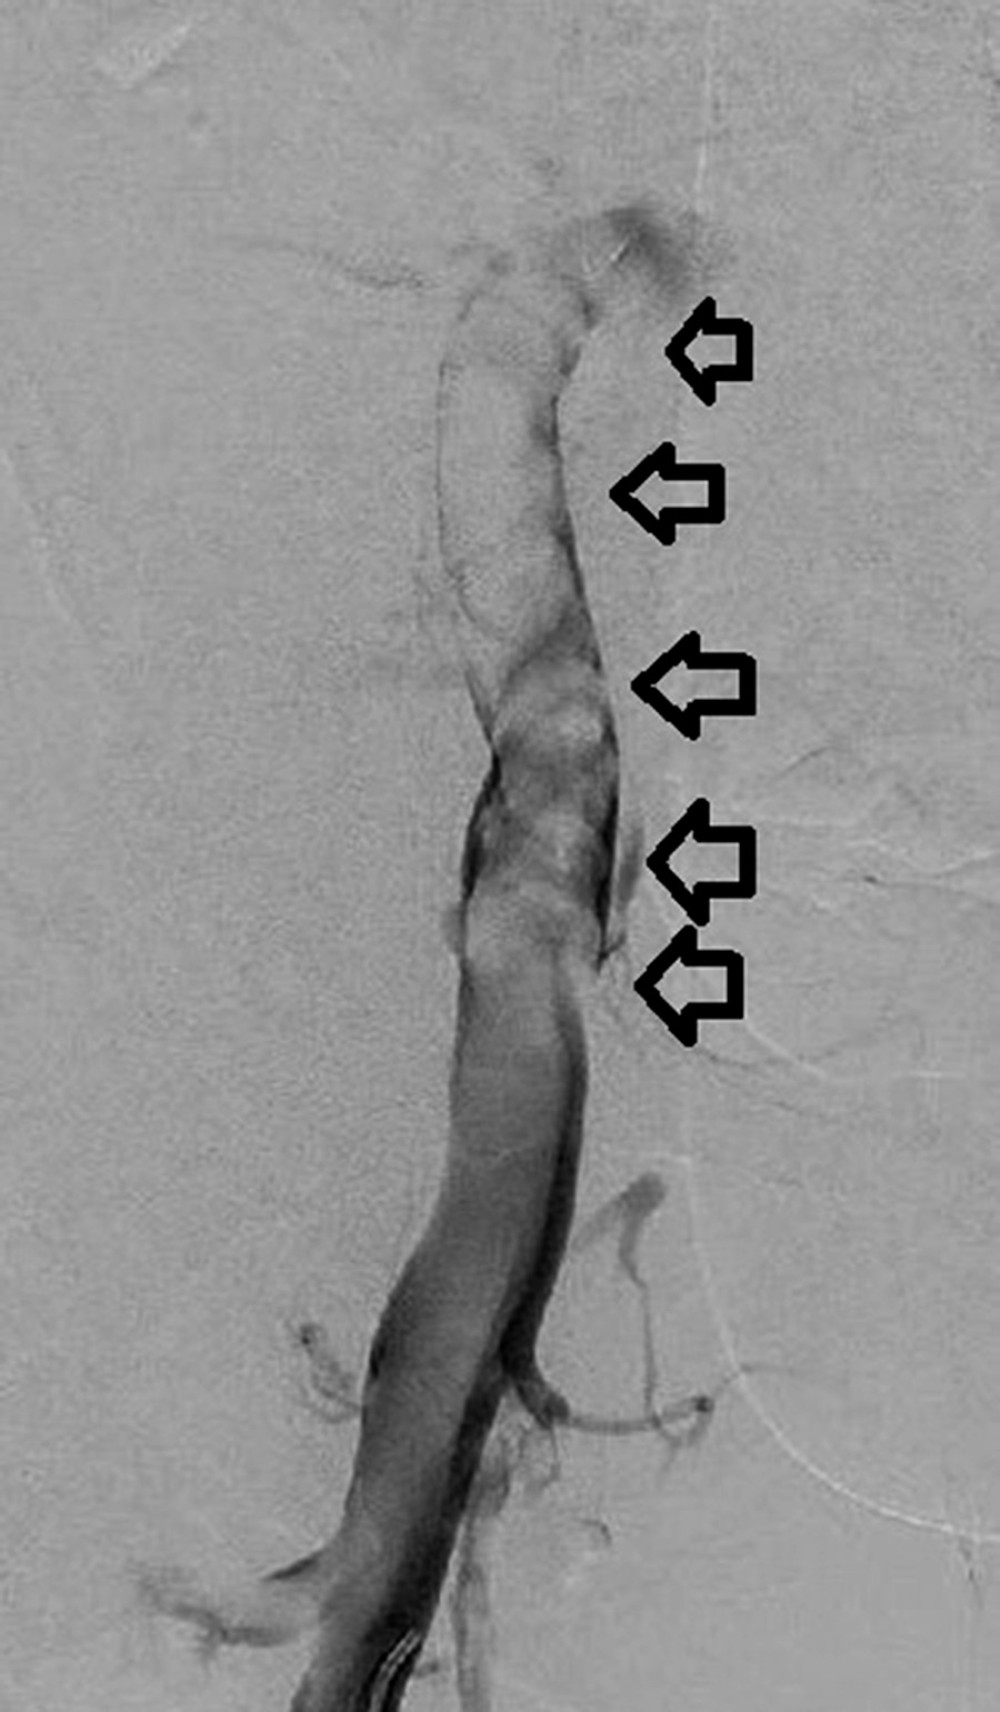 Left lower-extremity venogram with significant left femoral vein thrombus. Venogram performed via left popliteal vein access demonstrating the femoral vein. In this figure, flow is seen in the popliteal vein until reaching a significant amount of thrombosis identified in the femoral vein (black arrows), which impedes the flow of blood and contrast.